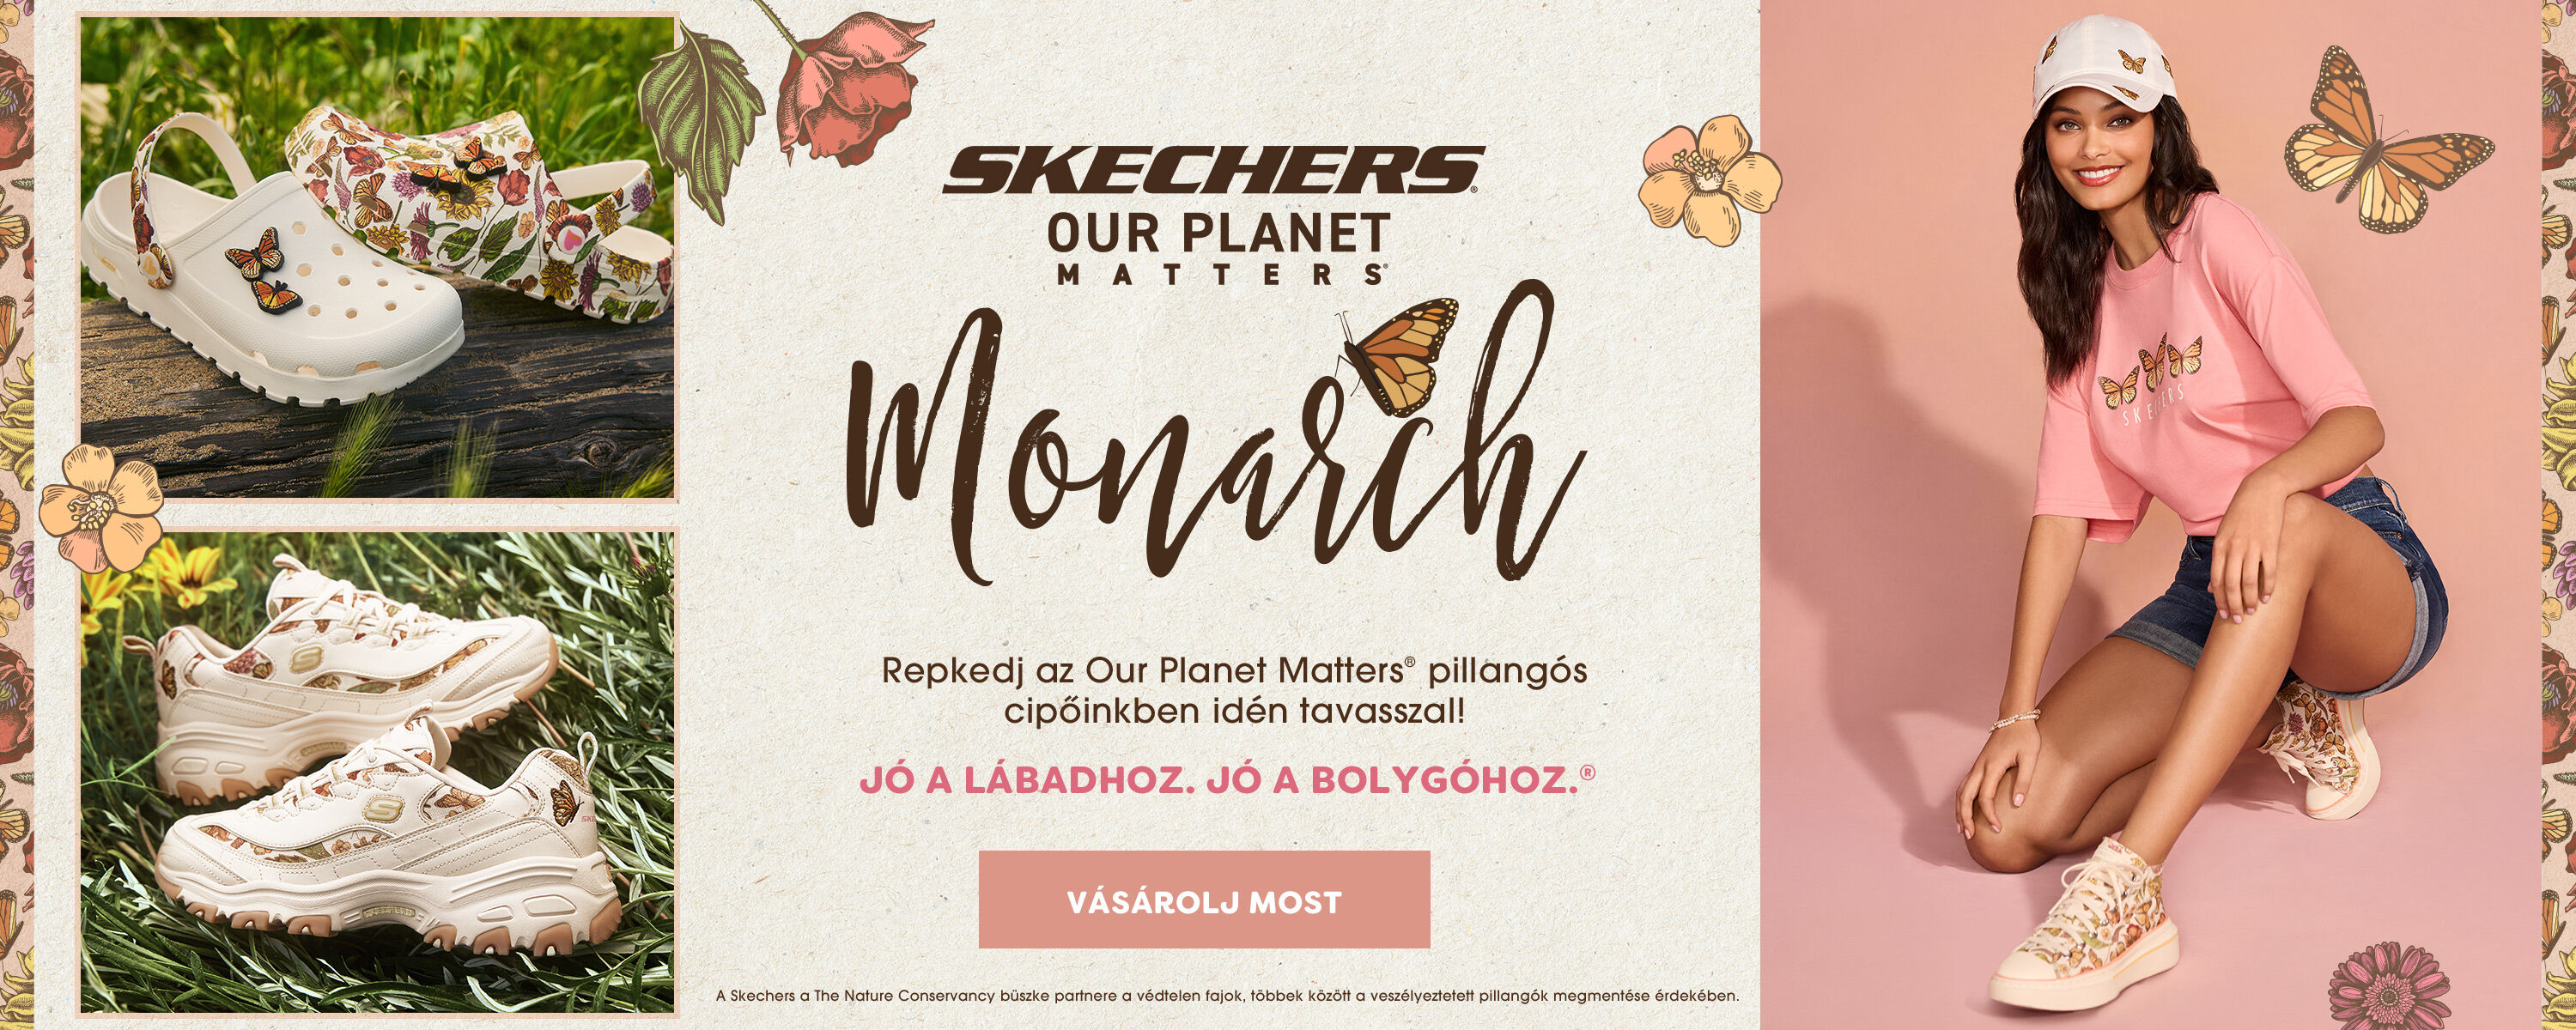 Our Planet Matters Monarch